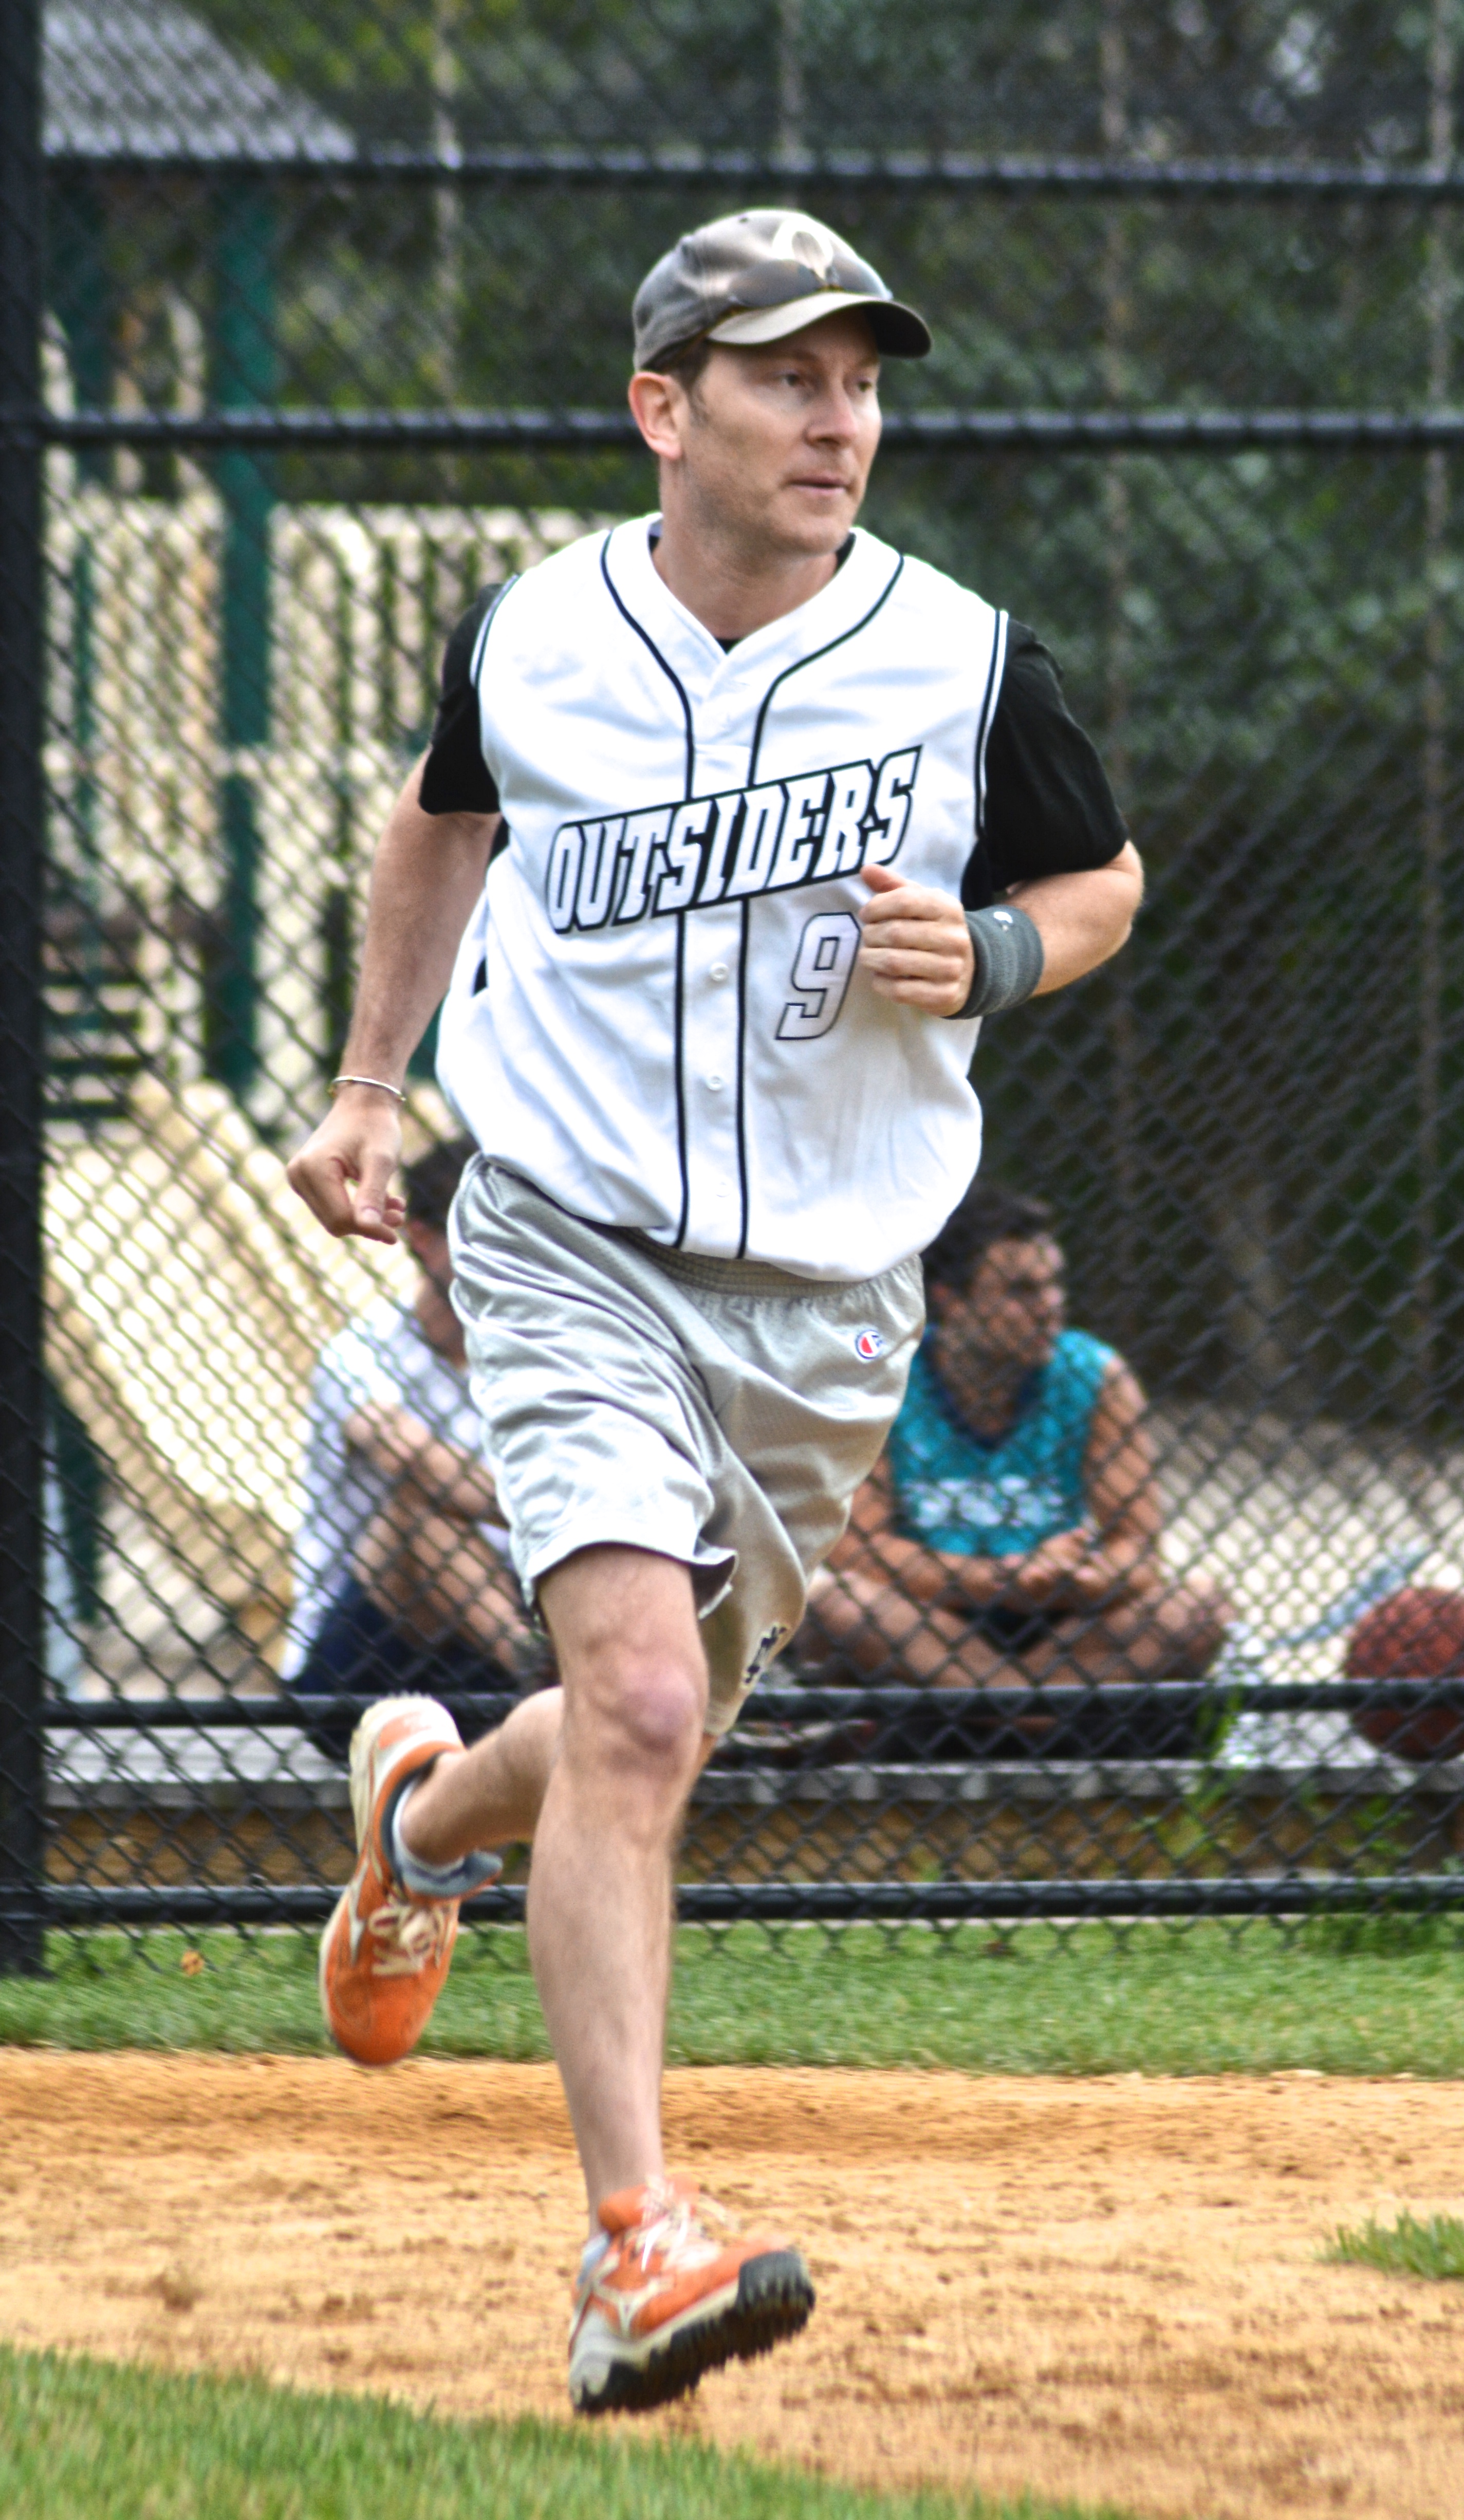 Peter Taub on his way to first base.